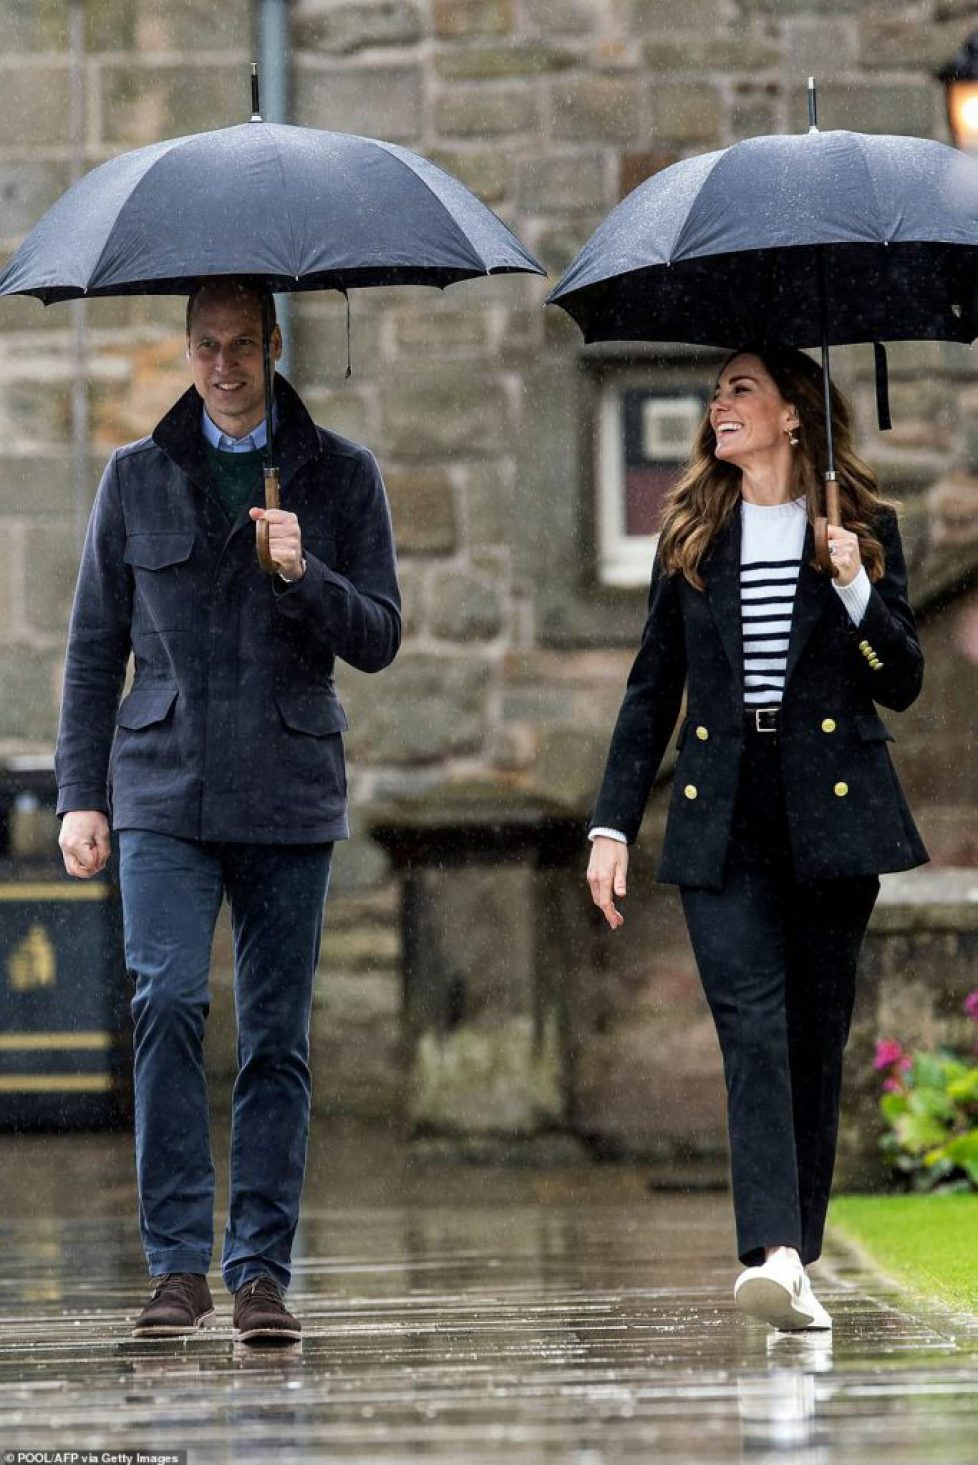 43471553-9621295-Plenty_to_smile_about_The_Duke_and_Duchess_of_Cambridge_today_re-m-36_1622035894257